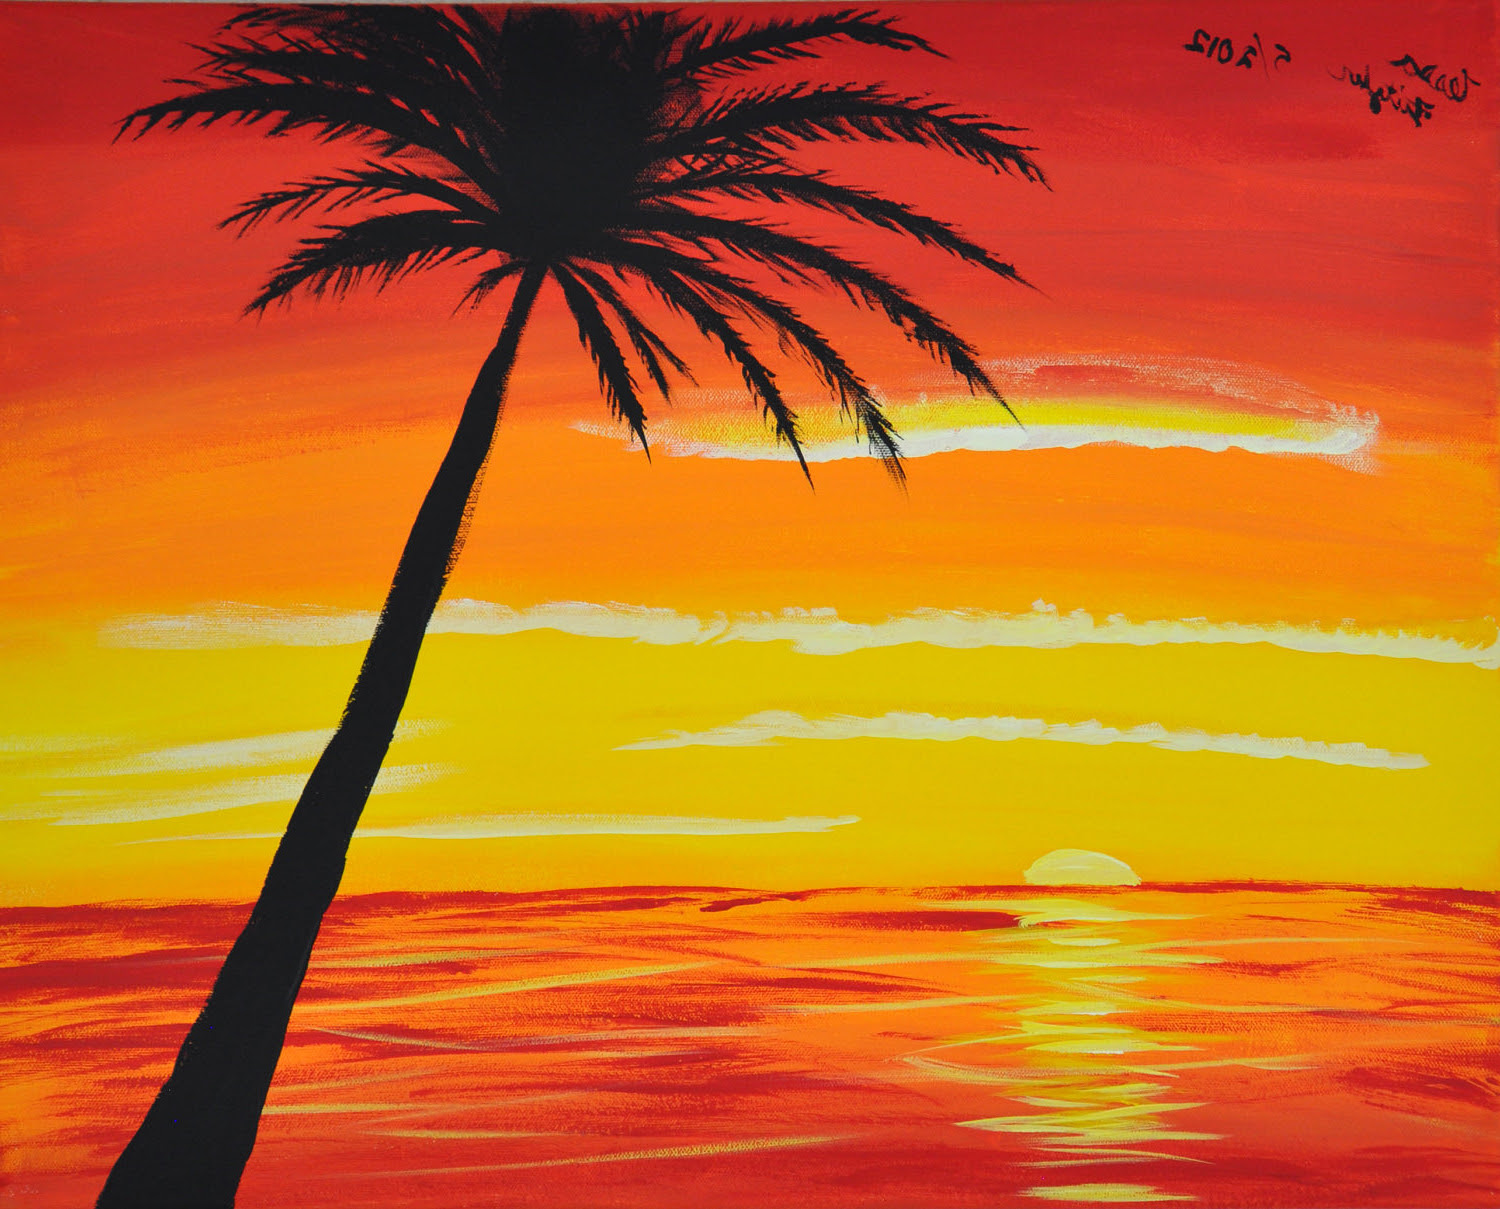 How To Draw A Sunset With Colored Pencils / If you're working with